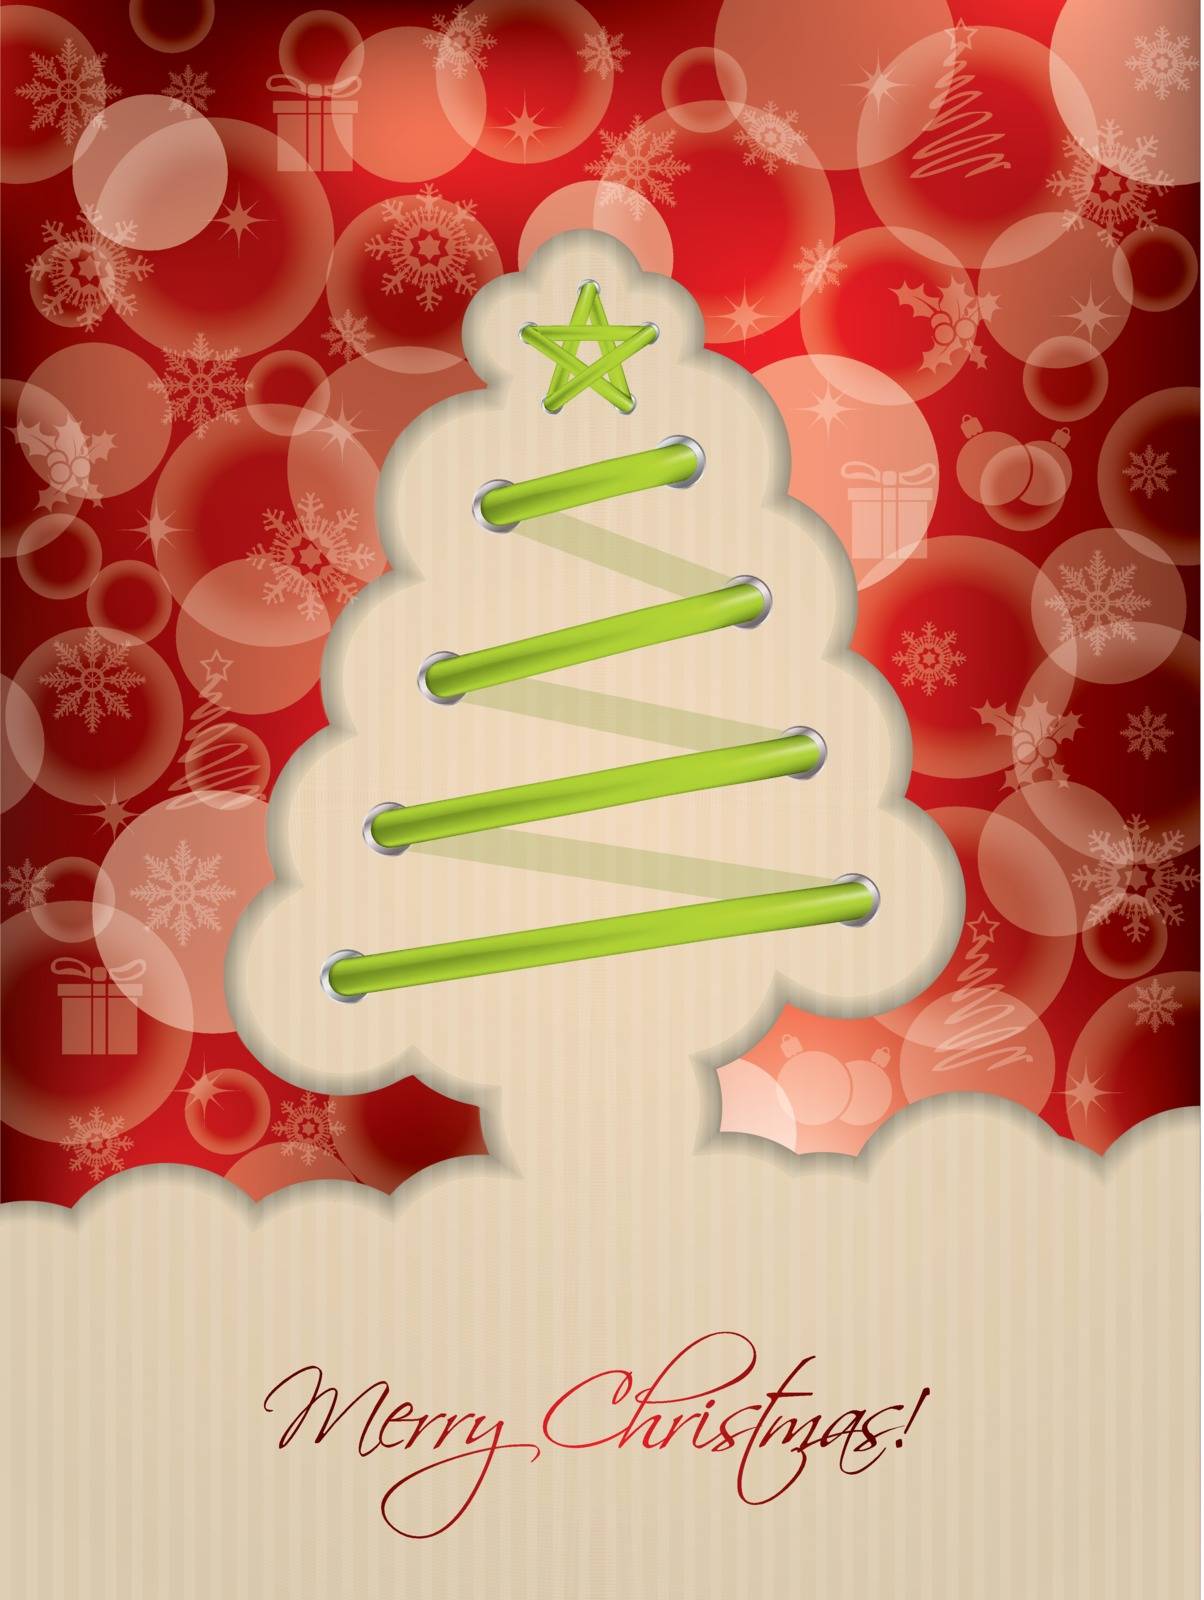 Red christmas greeting card with green tree shaped shoelace